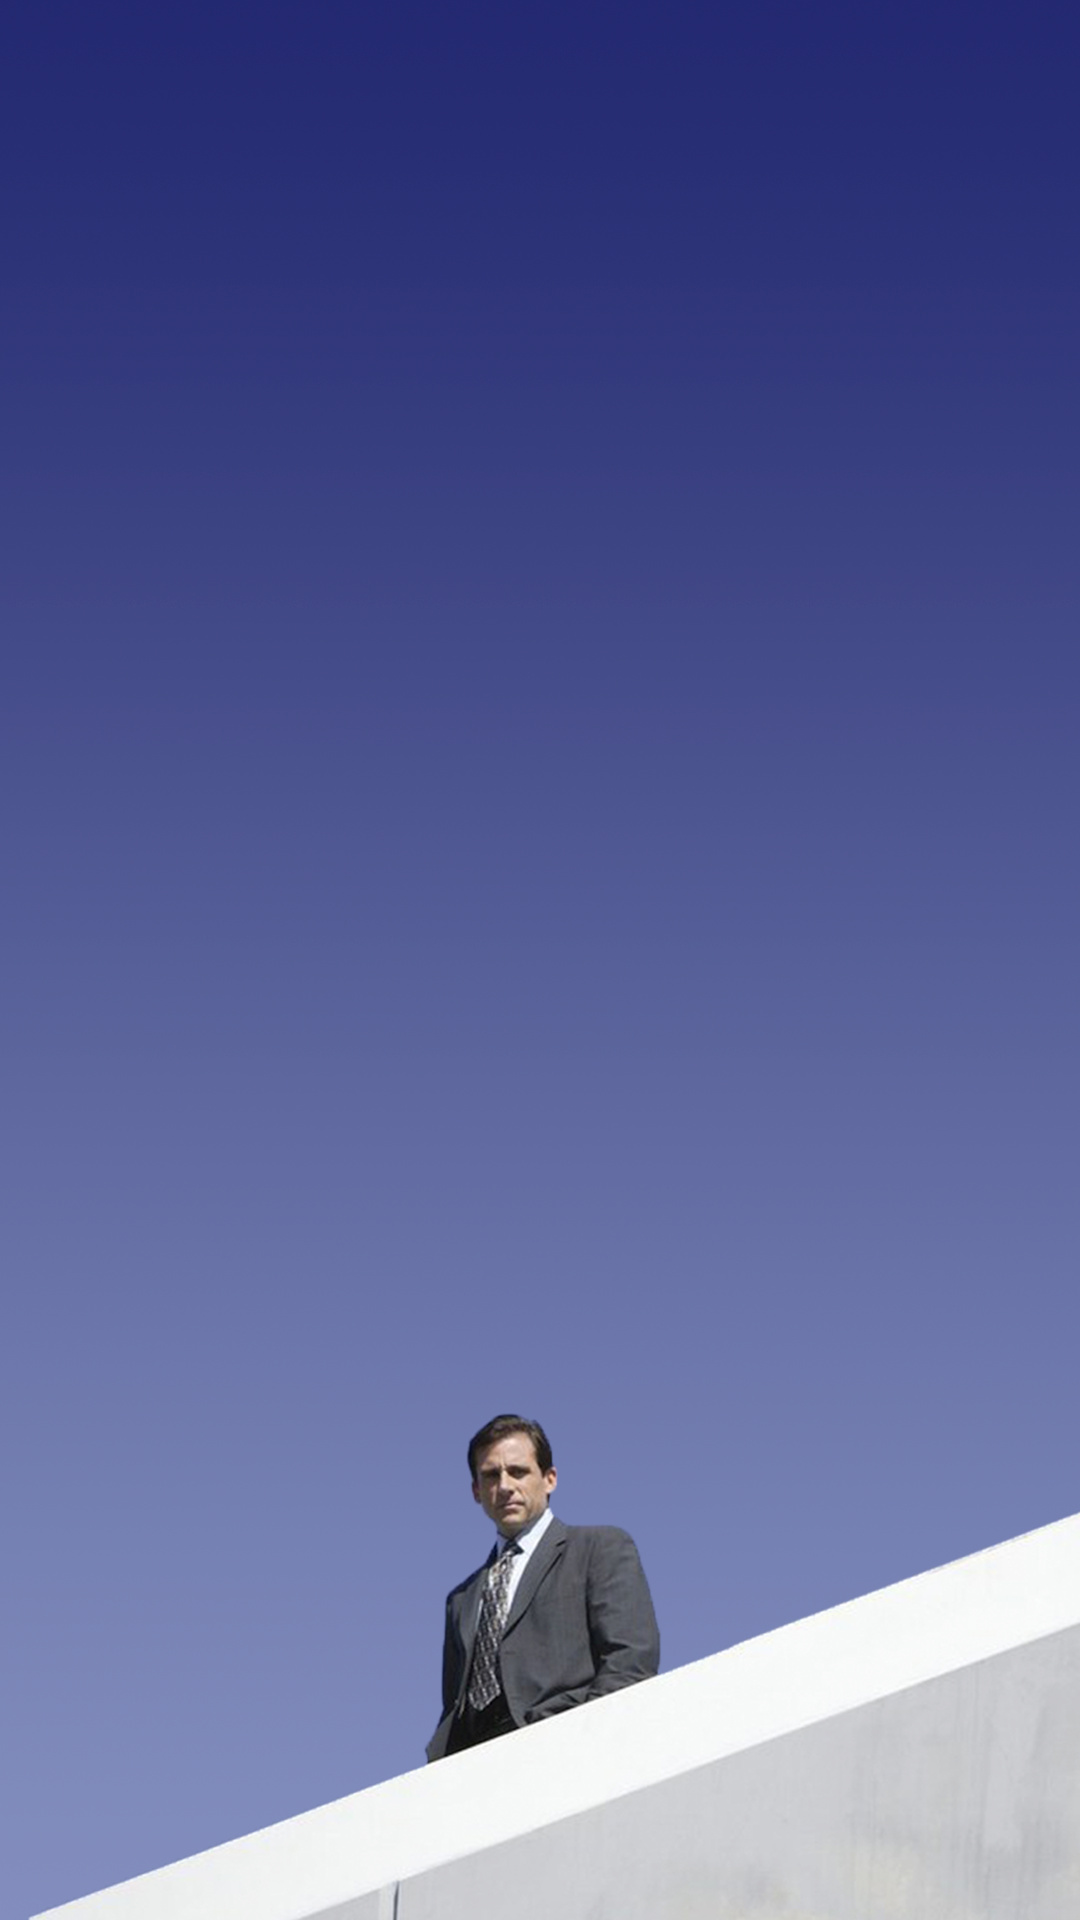 The Office, iPhone wallpapers, Backgrounds, 1080x1920 Full HD Handy